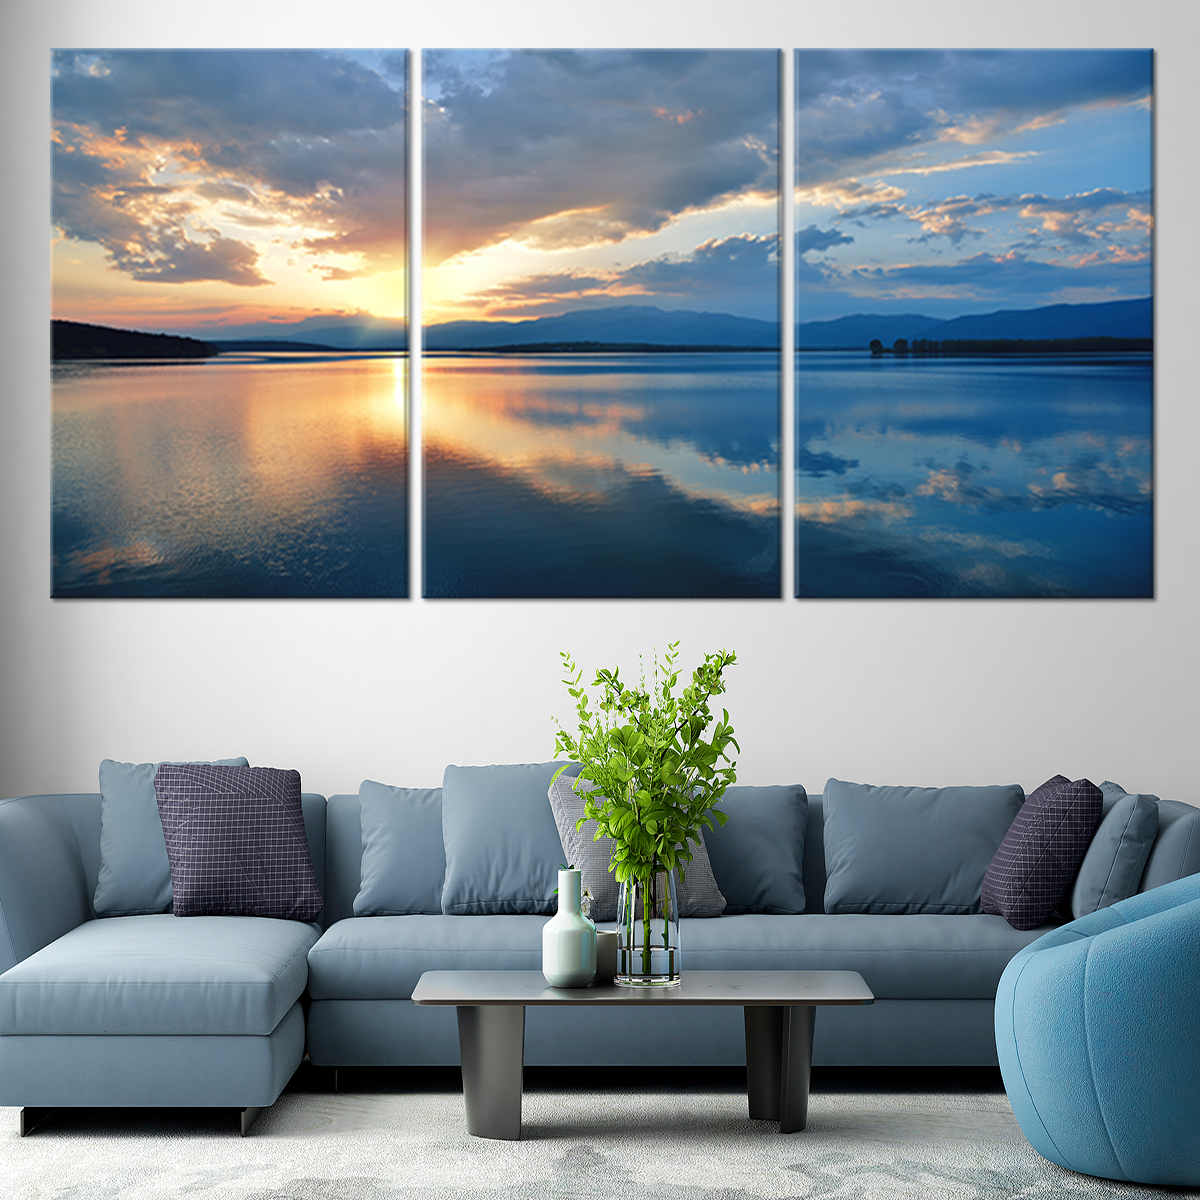 l Wall Art Sunset Lake Prints Canvas On by The Relax Stunning Canvas